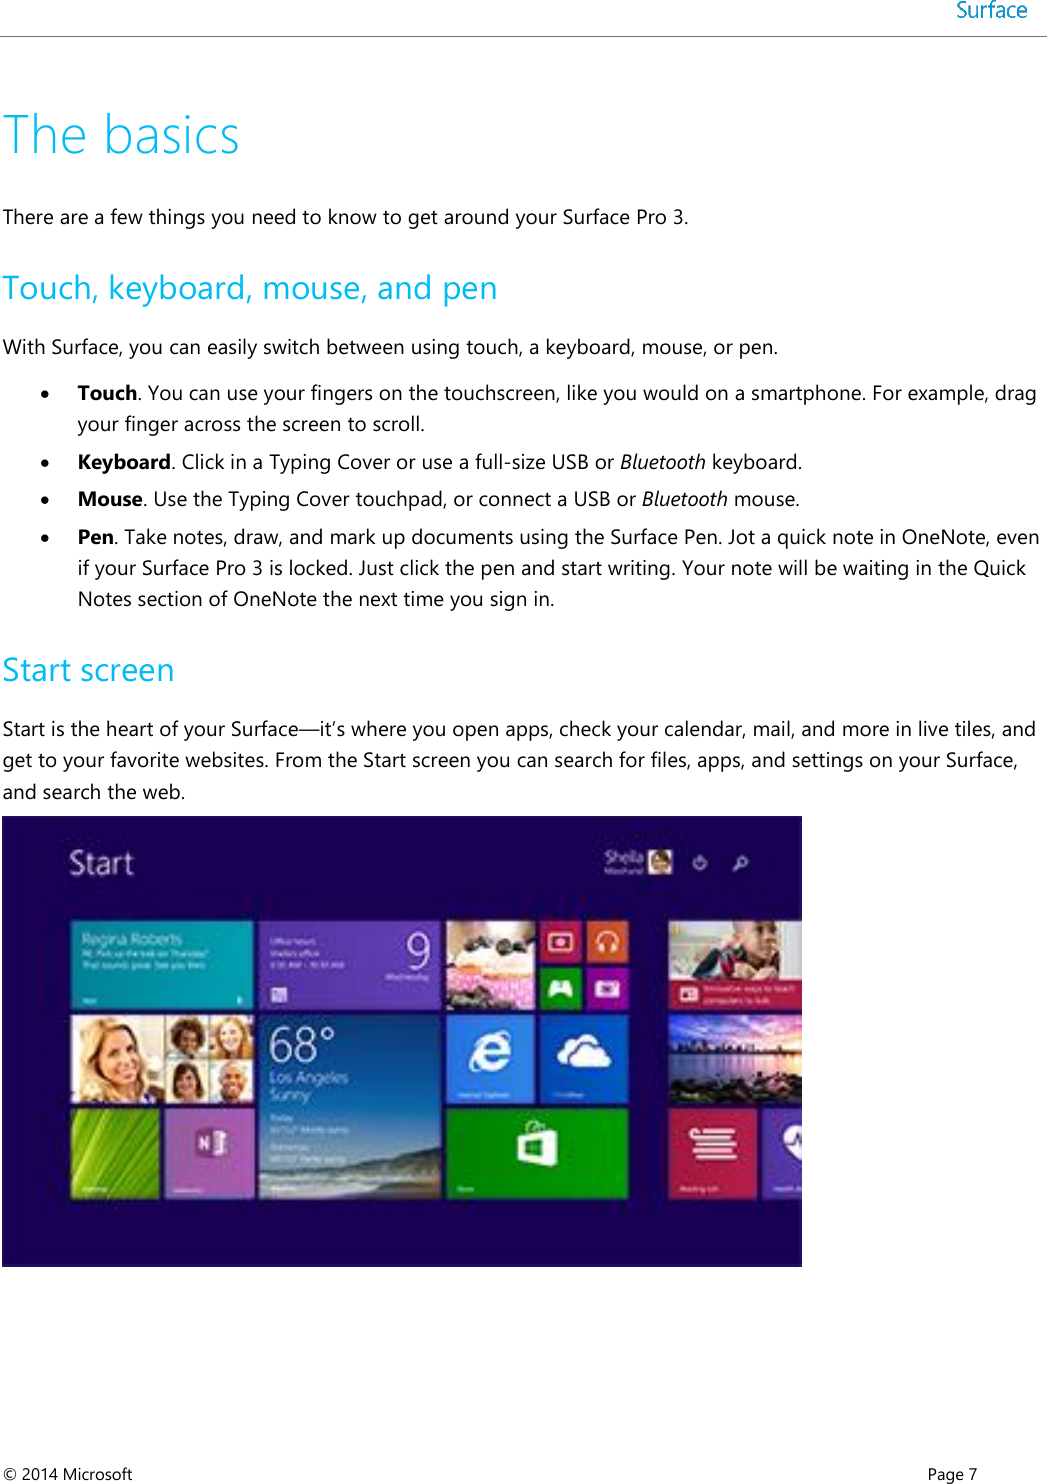  © 2014 Microsoft      Page 7  The basics  There are a few things you need to know to get around your Surface Pro 3.  Touch, keyboard, mouse, and pen  With Surface, you can easily switch between using touch, a keyboard, mouse, or pen.   Touch. You can use your fingers on the touchscreen, like you would on a smartphone. For example, drag your finger across the screen to scroll.   Keyboard. Click in a Typing Cover or use a full-size USB or Bluetooth keyboard.    Mouse. Use the Typing Cover touchpad, or connect a USB or Bluetooth mouse.    Pen. Take notes, draw, and mark up documents using the Surface Pen. Jot a quick note in OneNote, even if your Surface Pro 3 is locked. Just click the pen and start writing. Your note will be waiting in the Quick Notes section of OneNote the next time you sign in.  Start screen Start is the heart of your Surface—it’s where you open apps, check your calendar, mail, and more in live tiles, and get to your favorite websites. From the Start screen you can search for files, apps, and settings on your Surface, and search the web.     